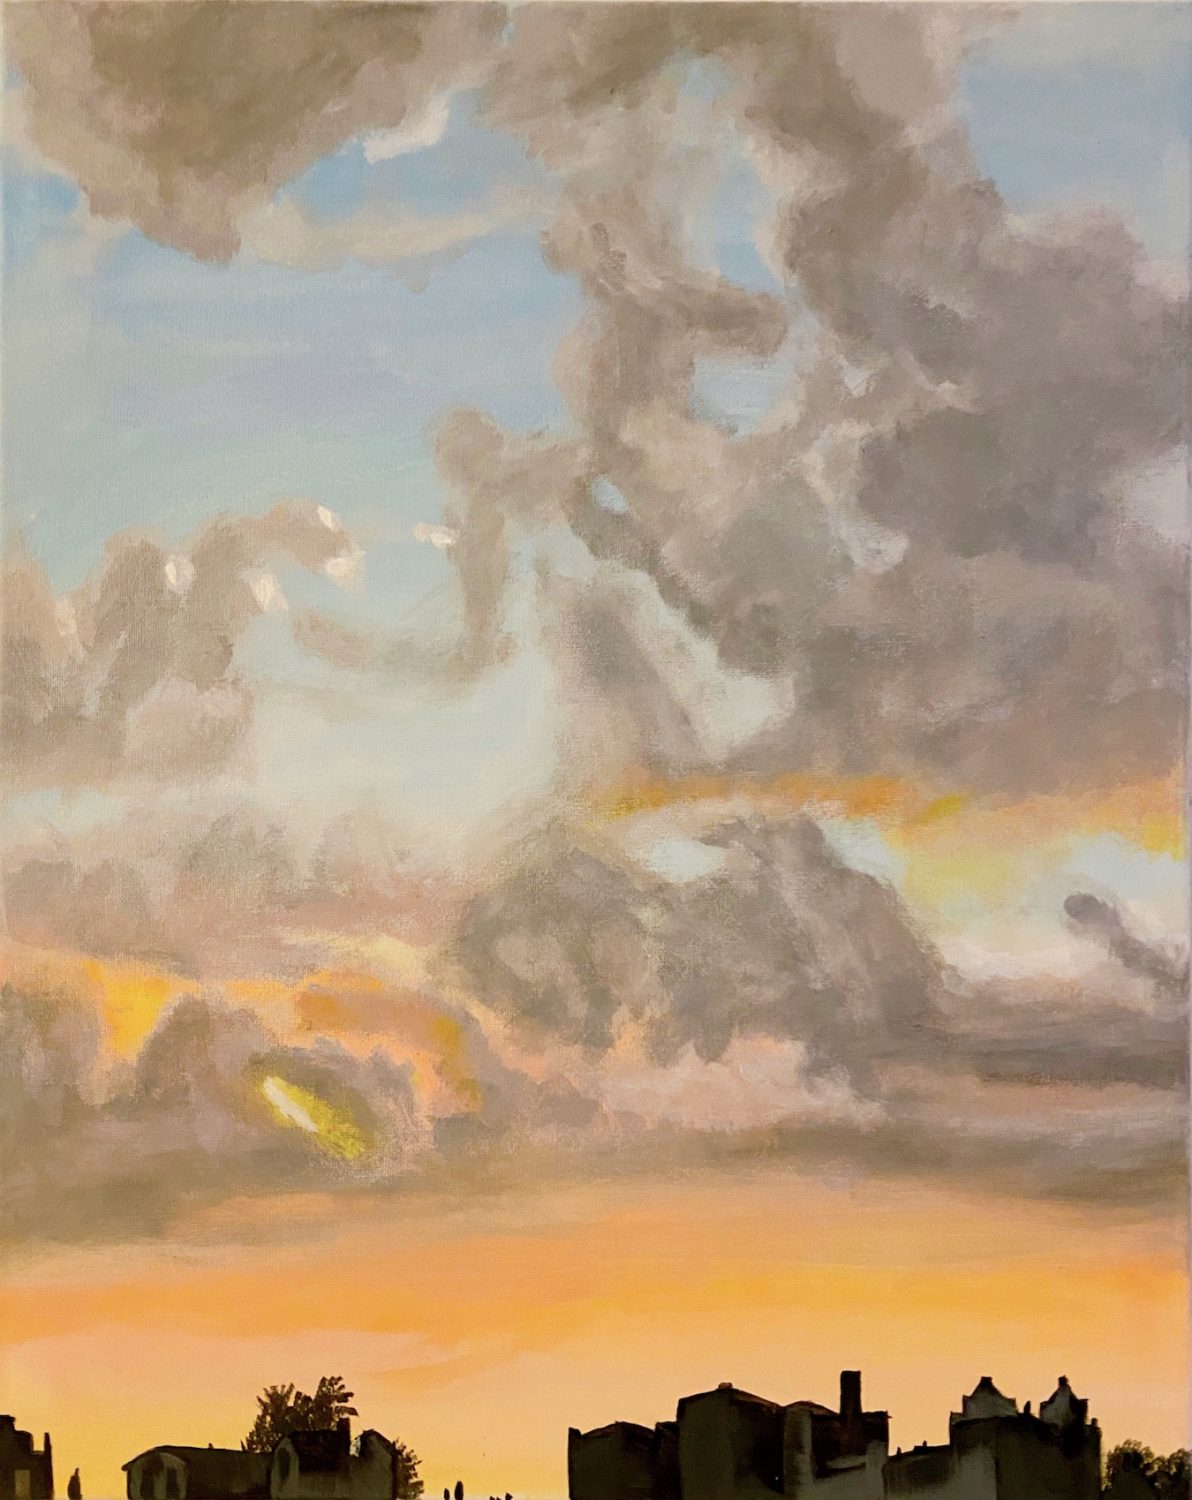 thumbnail of Landscape by Cindy Zhou. Medium: Acrylic on canvas. Size 24 x 18 inches Date 2020